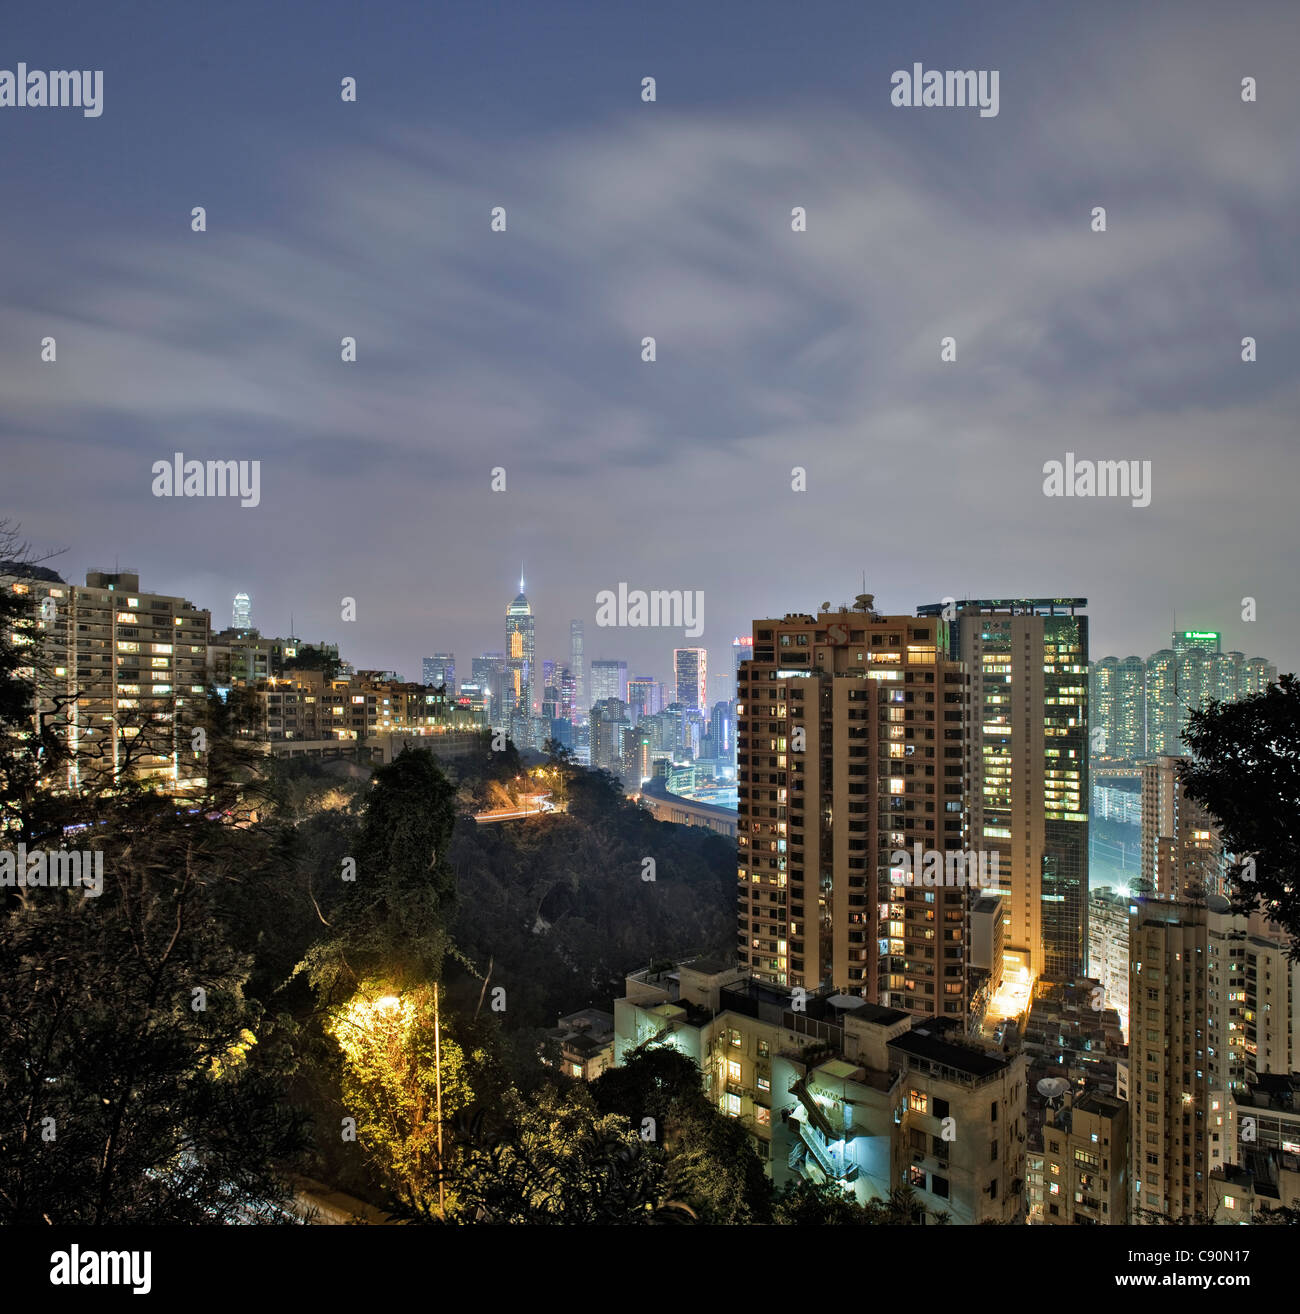 Fung Fai Terrace, Happy Valley residential area and Wan Chai at night, Skyline, Hong Kong, China Stock Photo